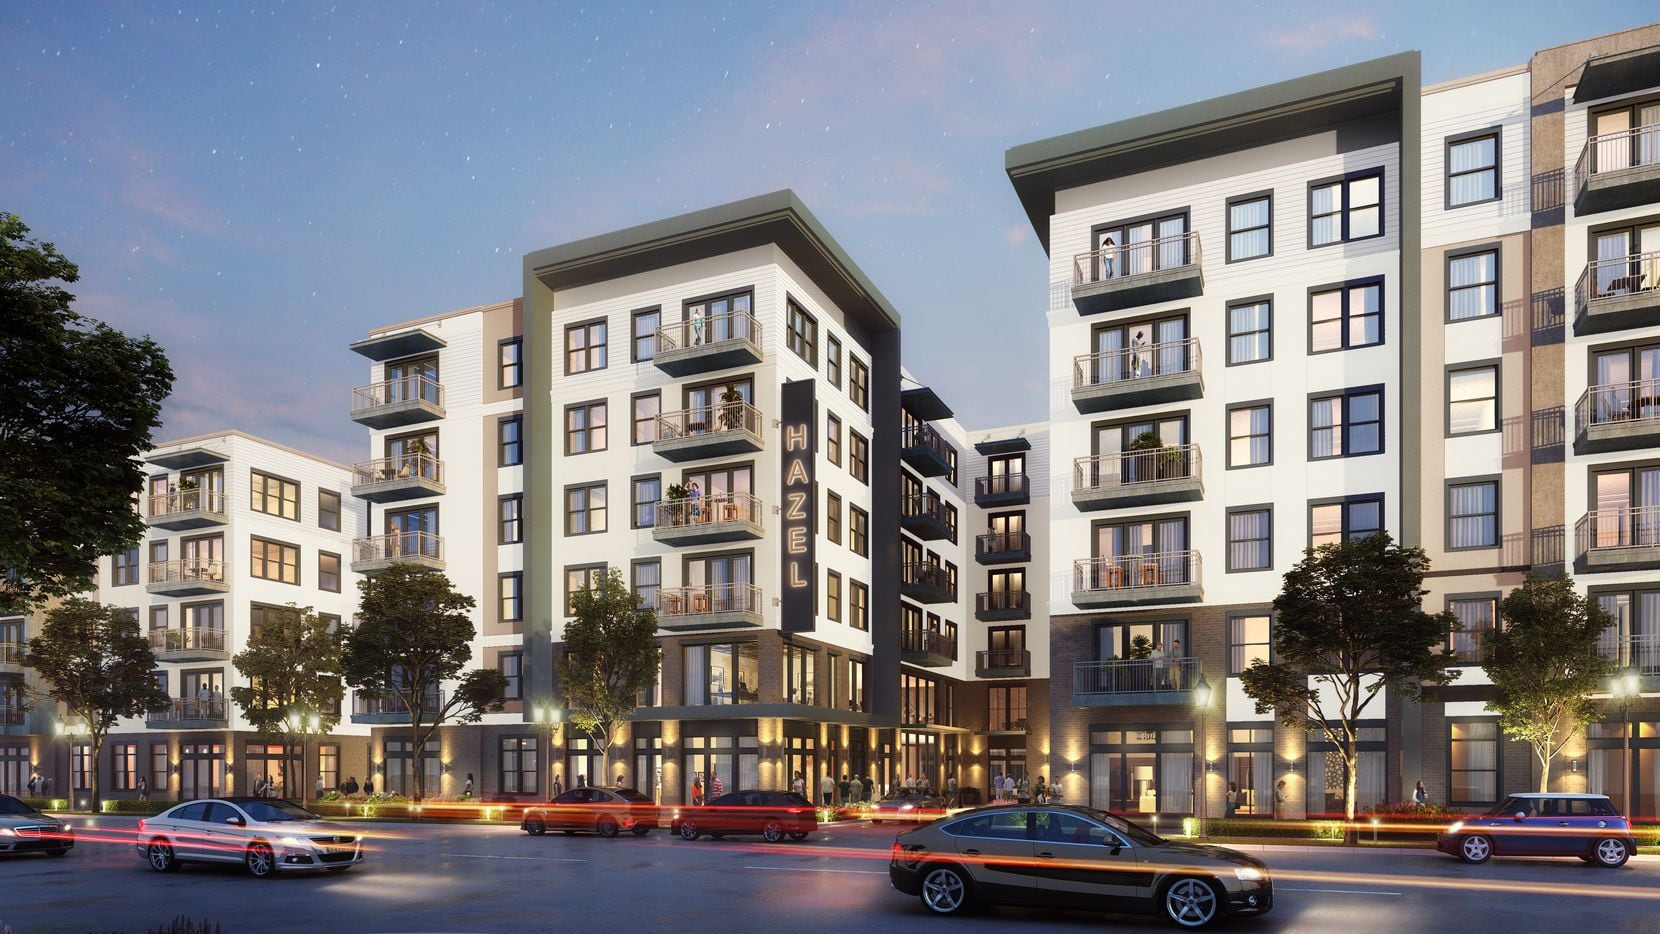 The planned Hazel apartments will have almost 400 units.